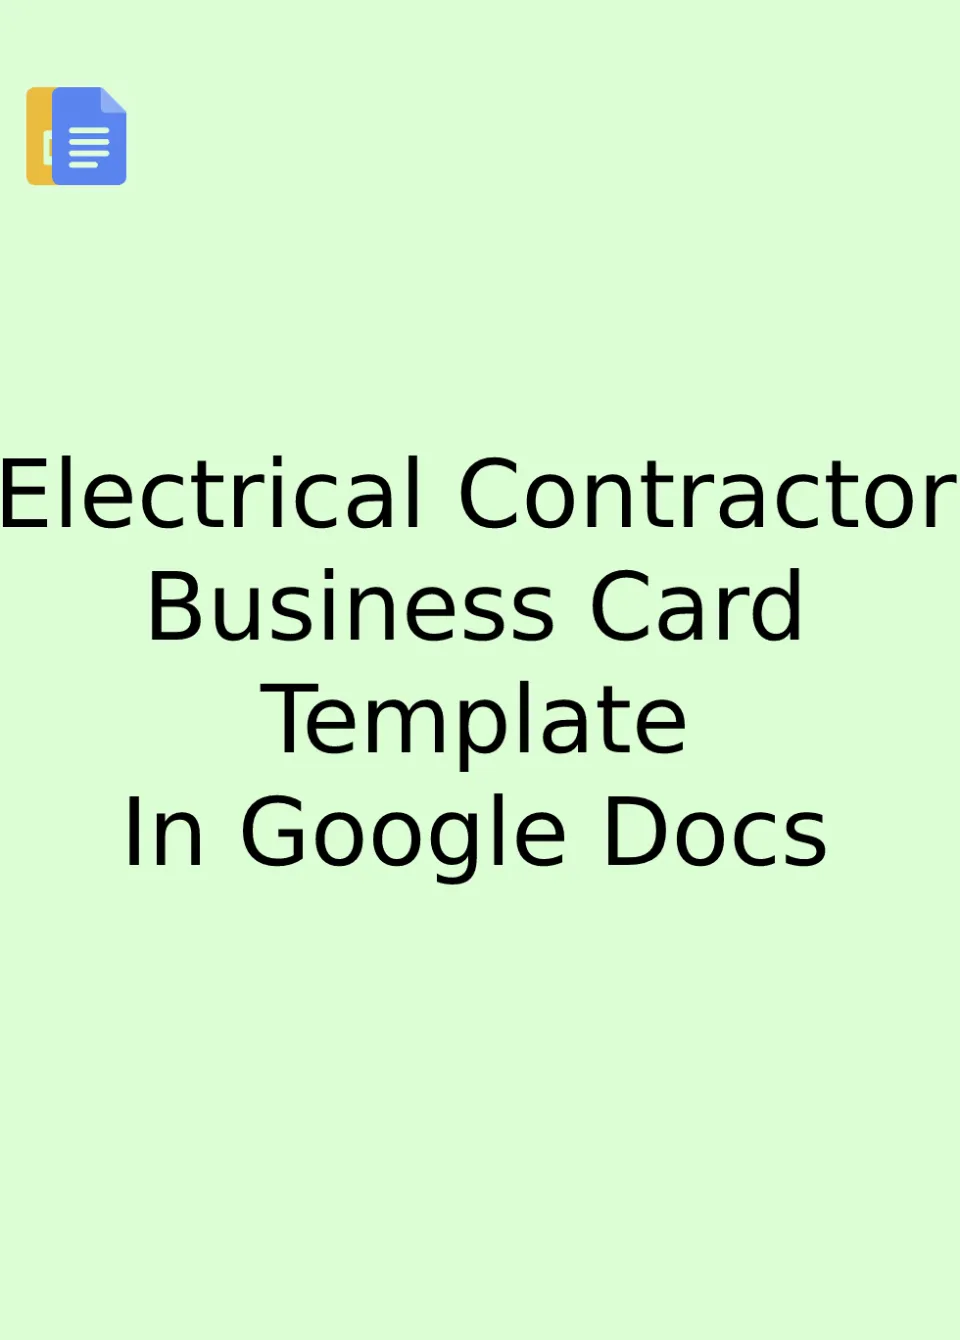 Electrical Contractor Business Card Template Google Docs